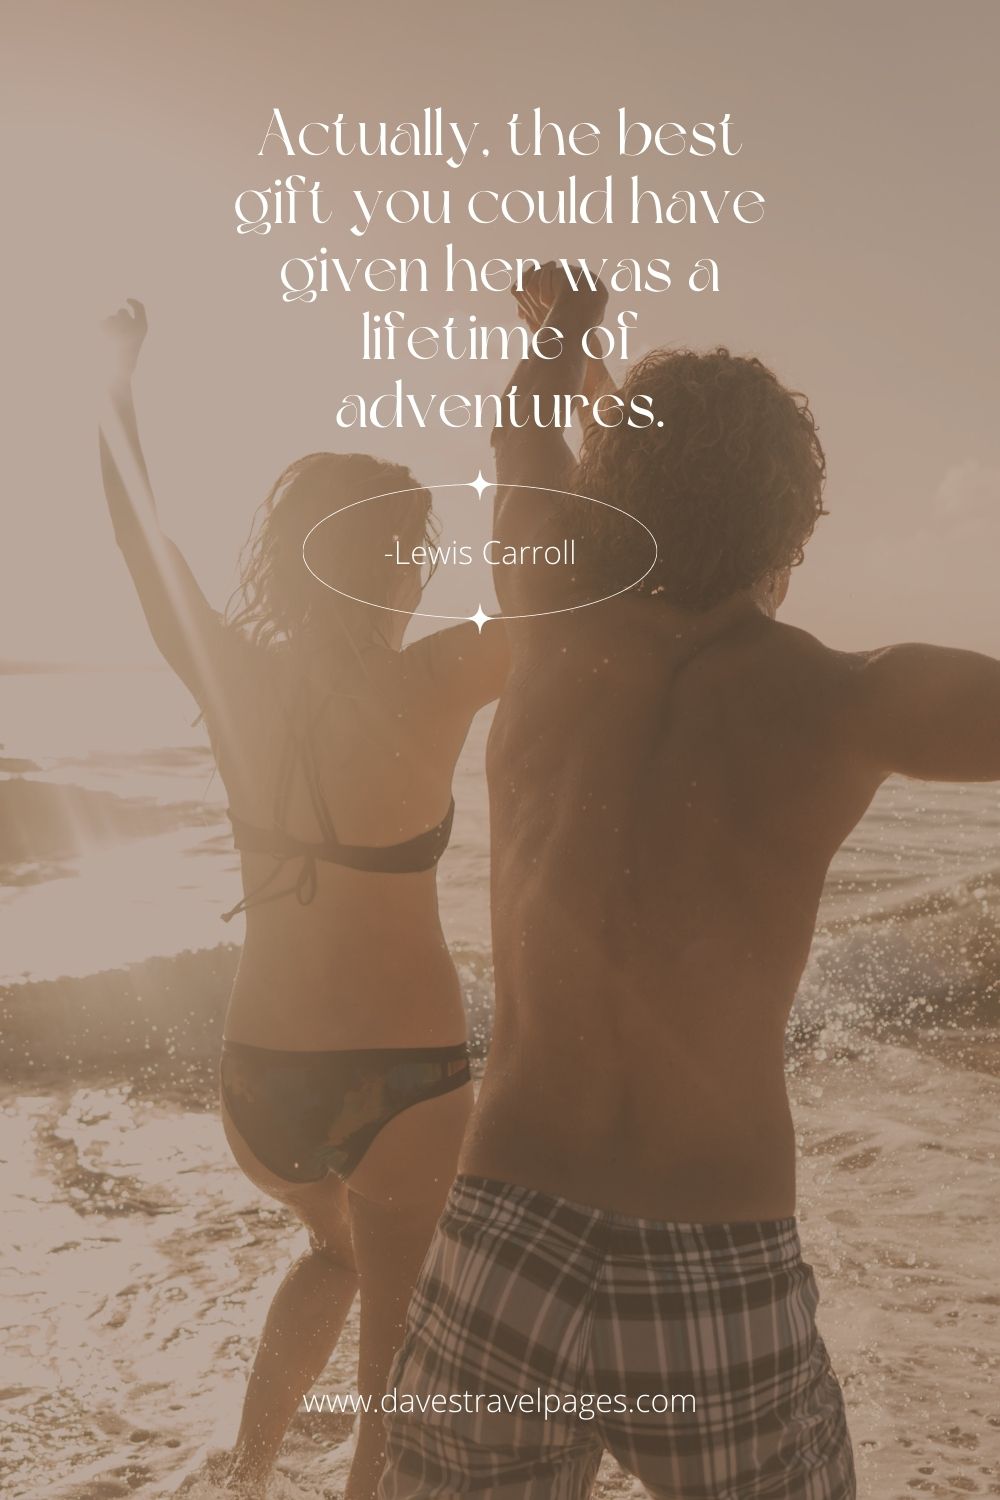 travel as a couple quotes